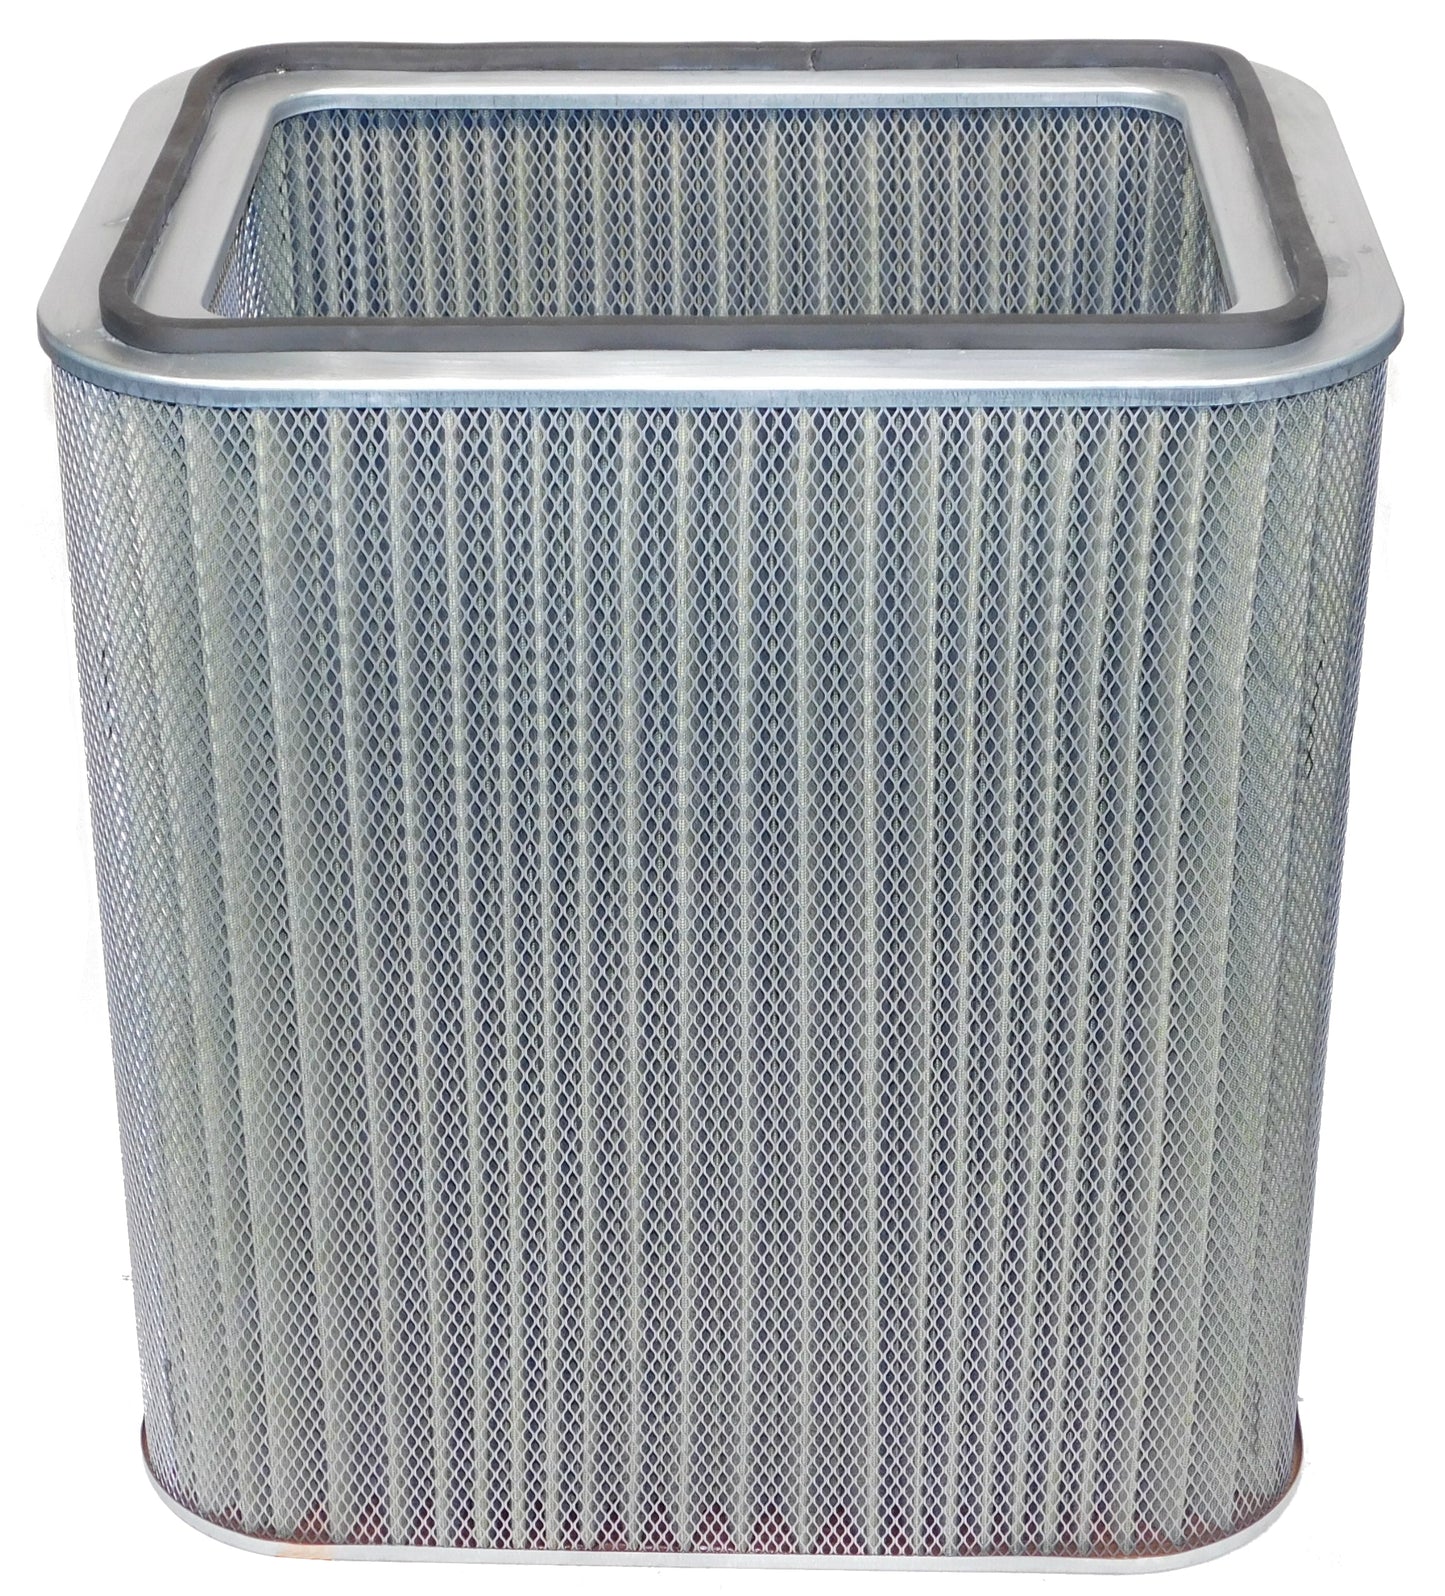 P031595-016-340 - Replacement for Torit filter